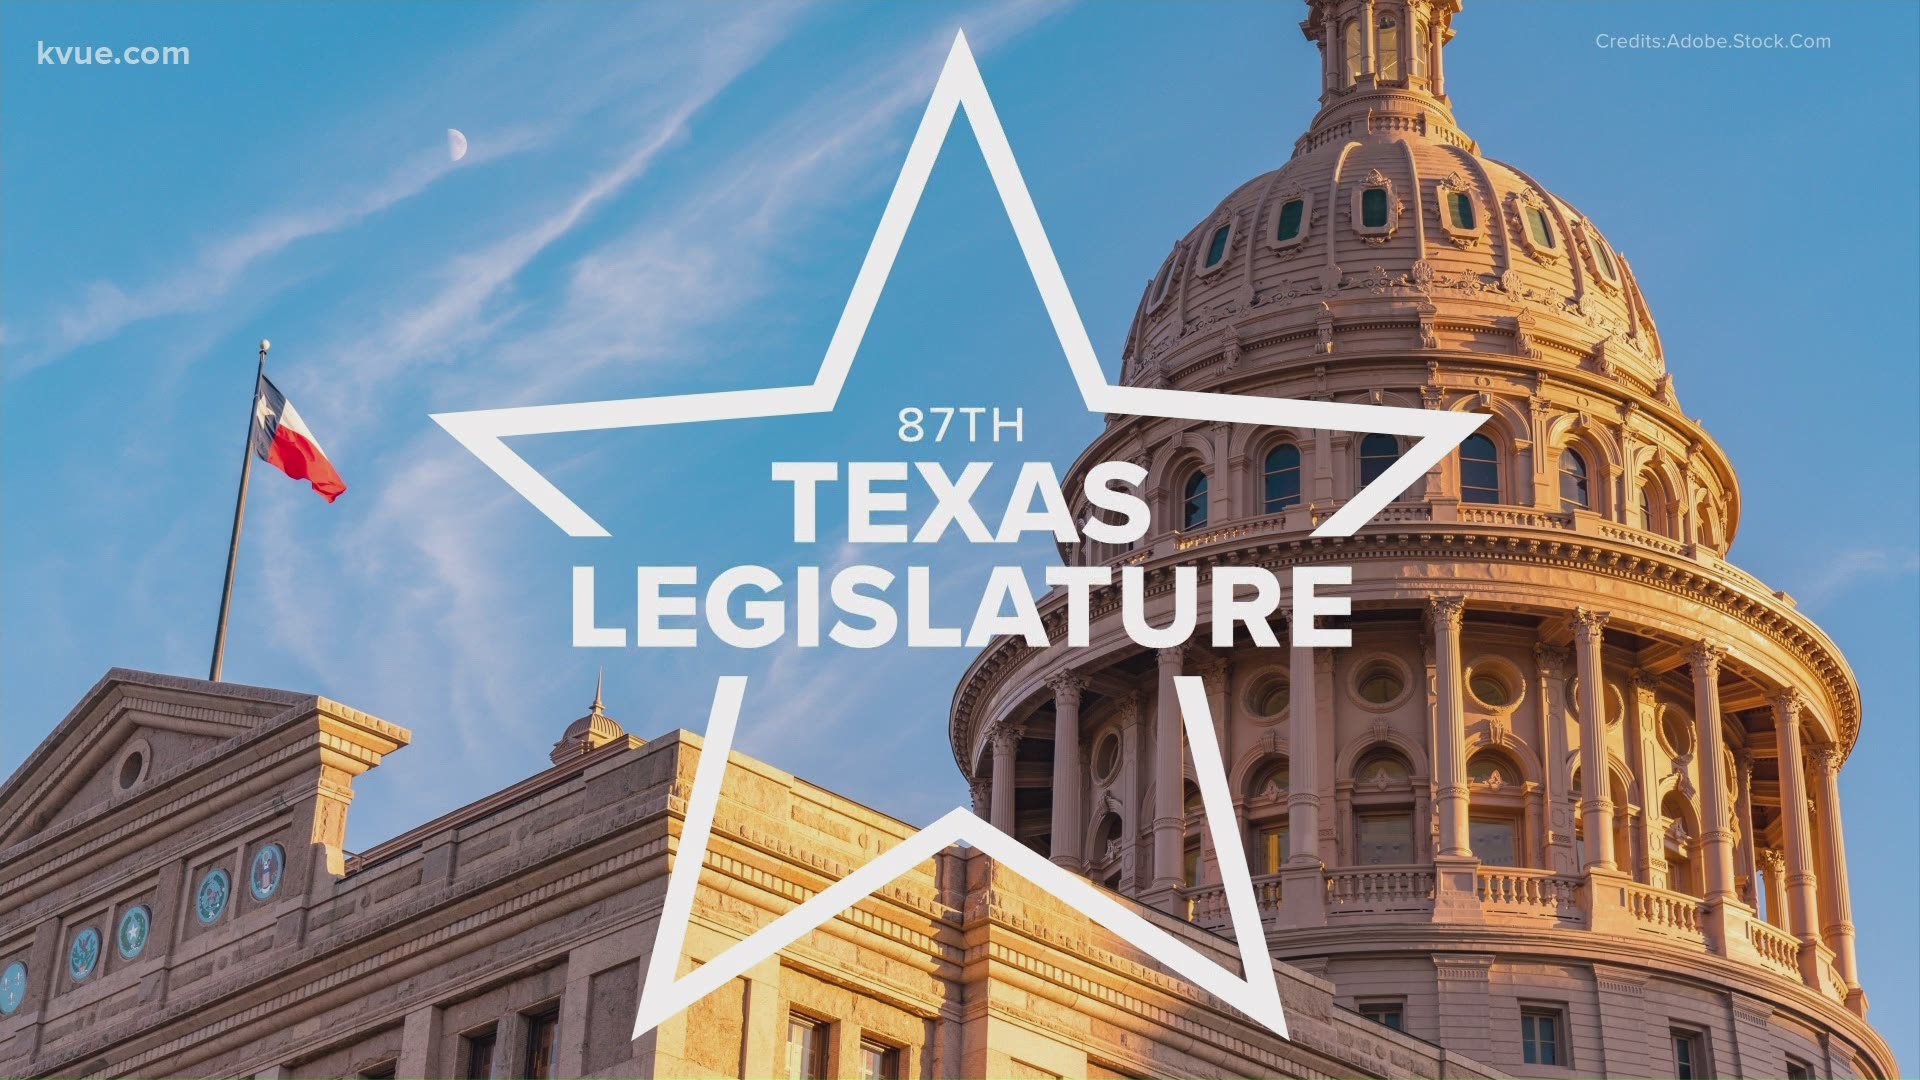 Monday night, Gov. Greg Abbott will deliver his State of the State address. In the address, the governor will lay out his legislative priorities.